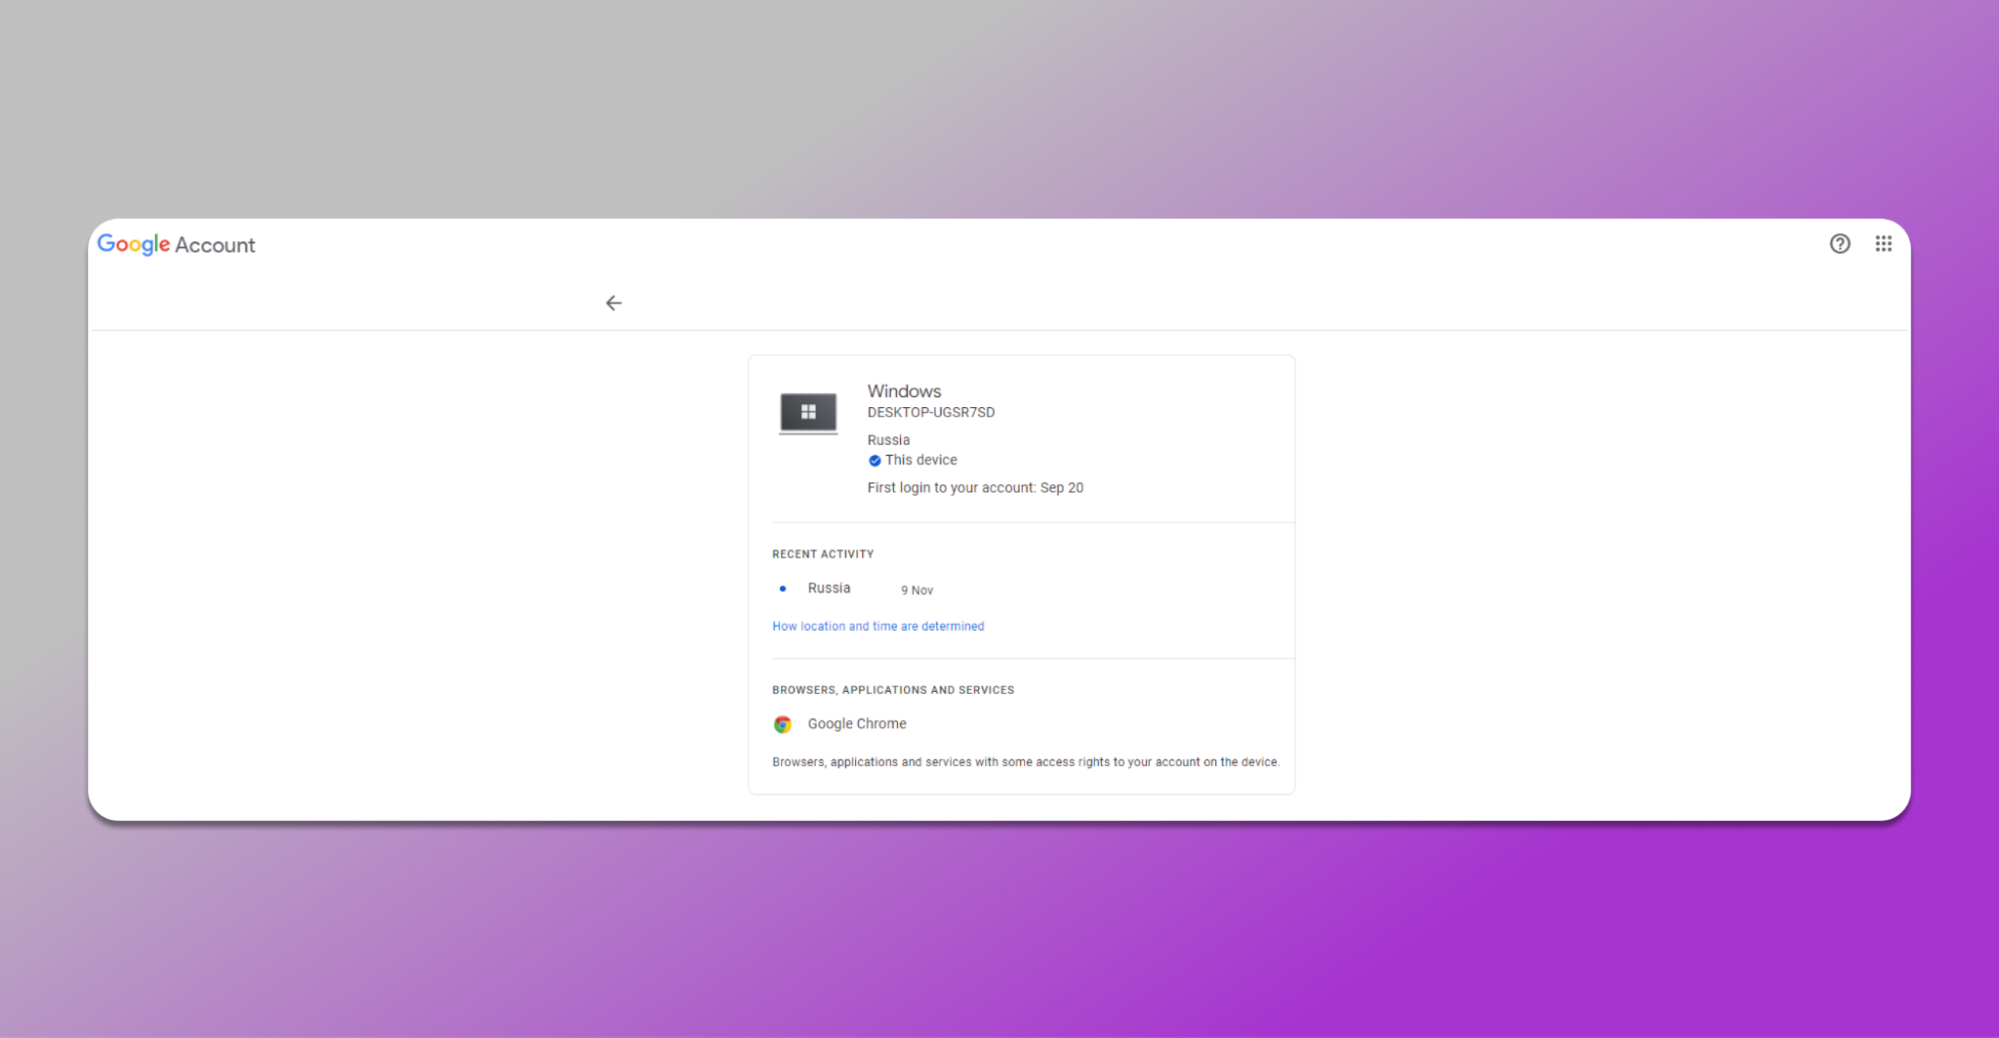 This is how a Google account looks on a PC where synchronization is enabled